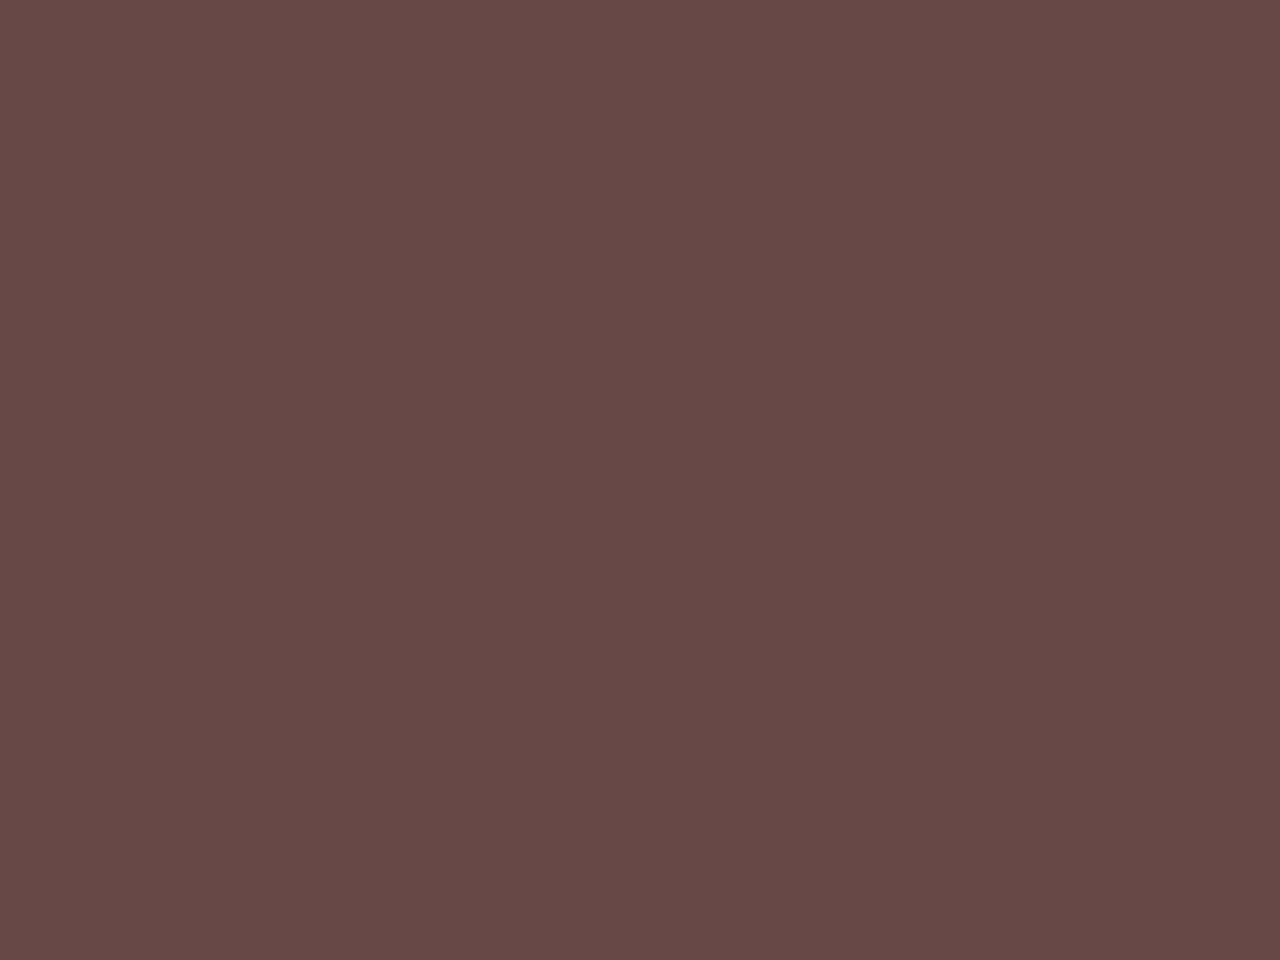 1280x960 Rose Ebony Solid Color Background